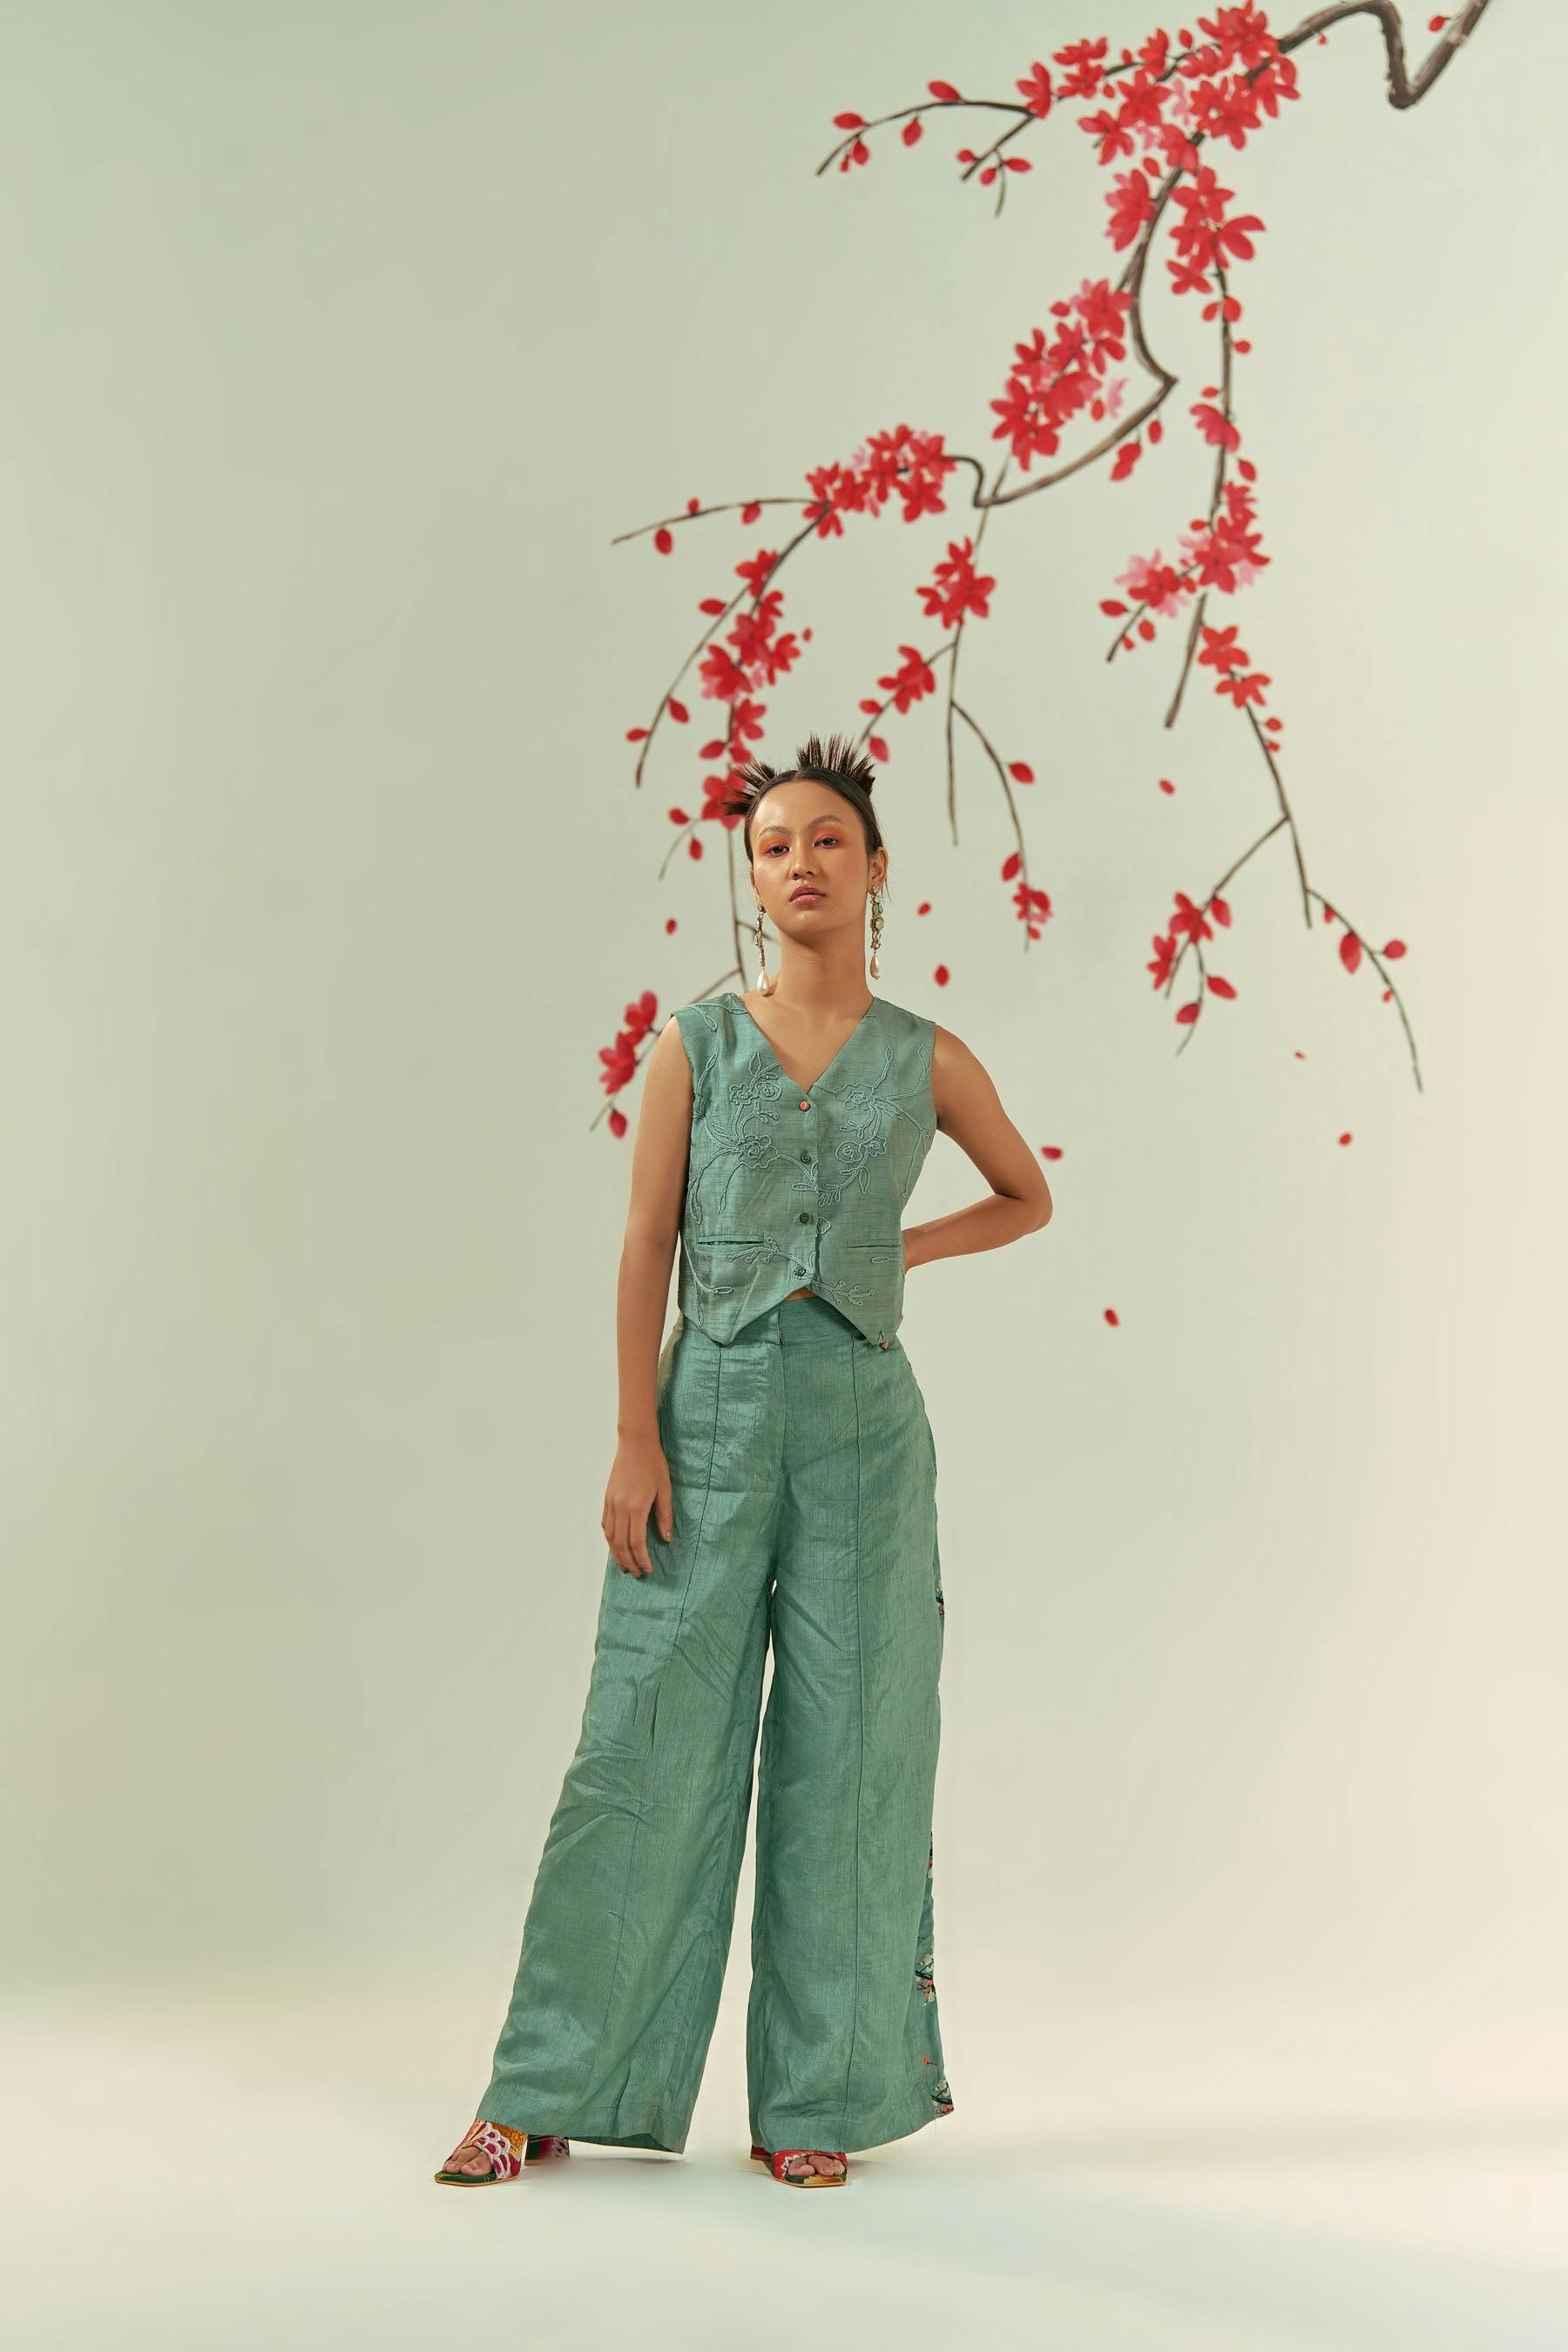 Kaze Vest and Tailored Pants Co-ord, a product by COEUR by Ankita Khurana